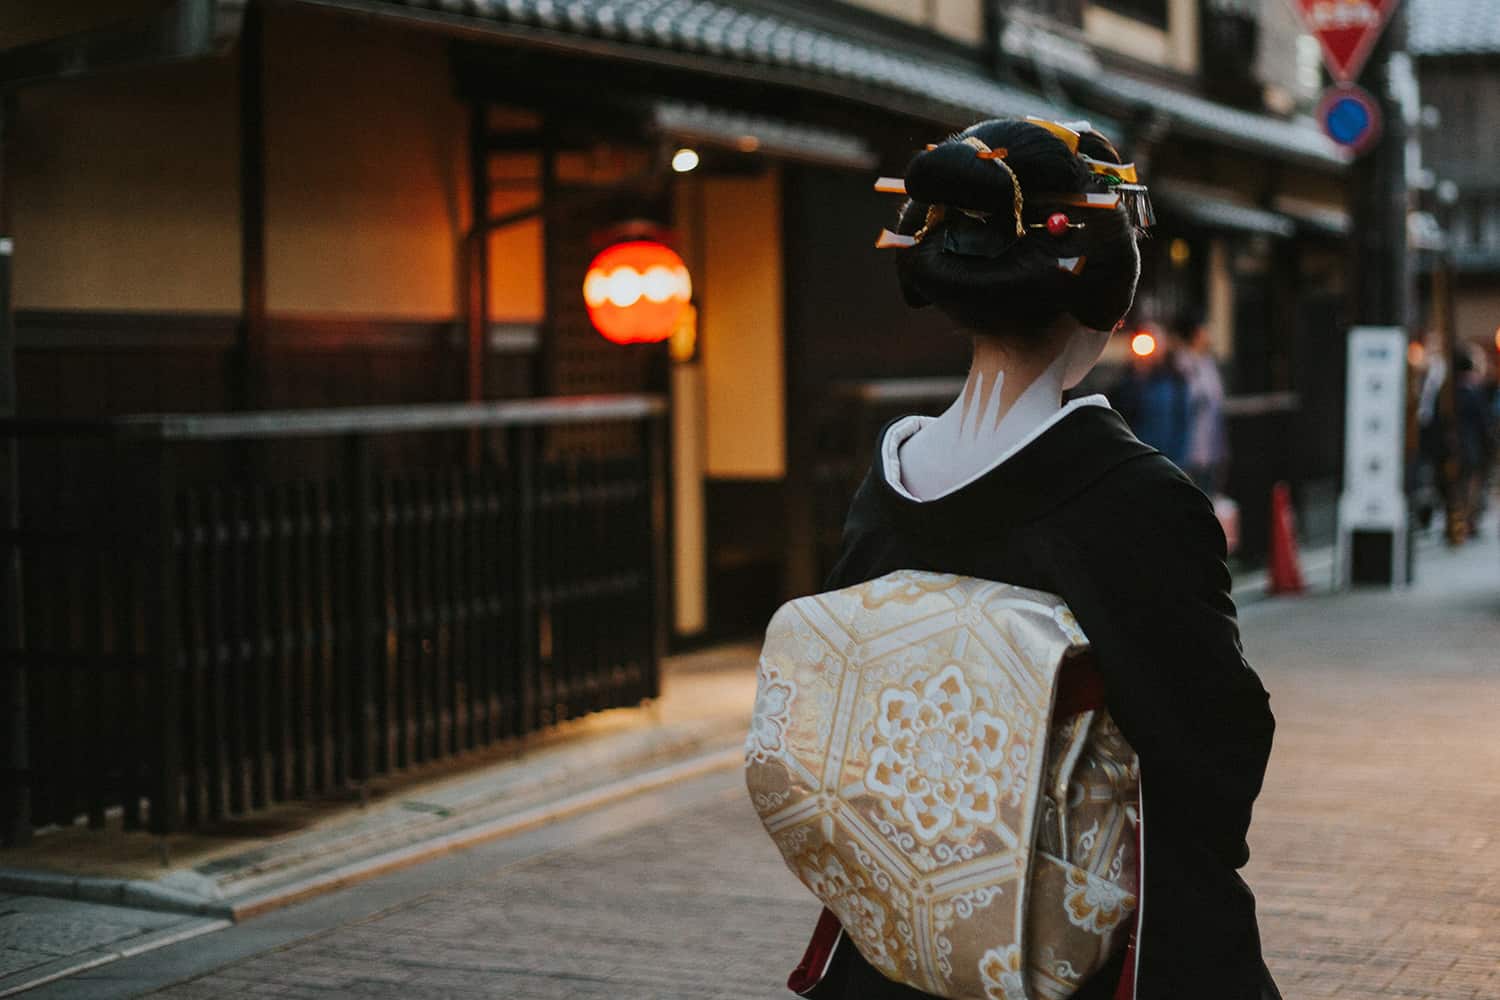 Maiko going to work in Gion, Kyoto